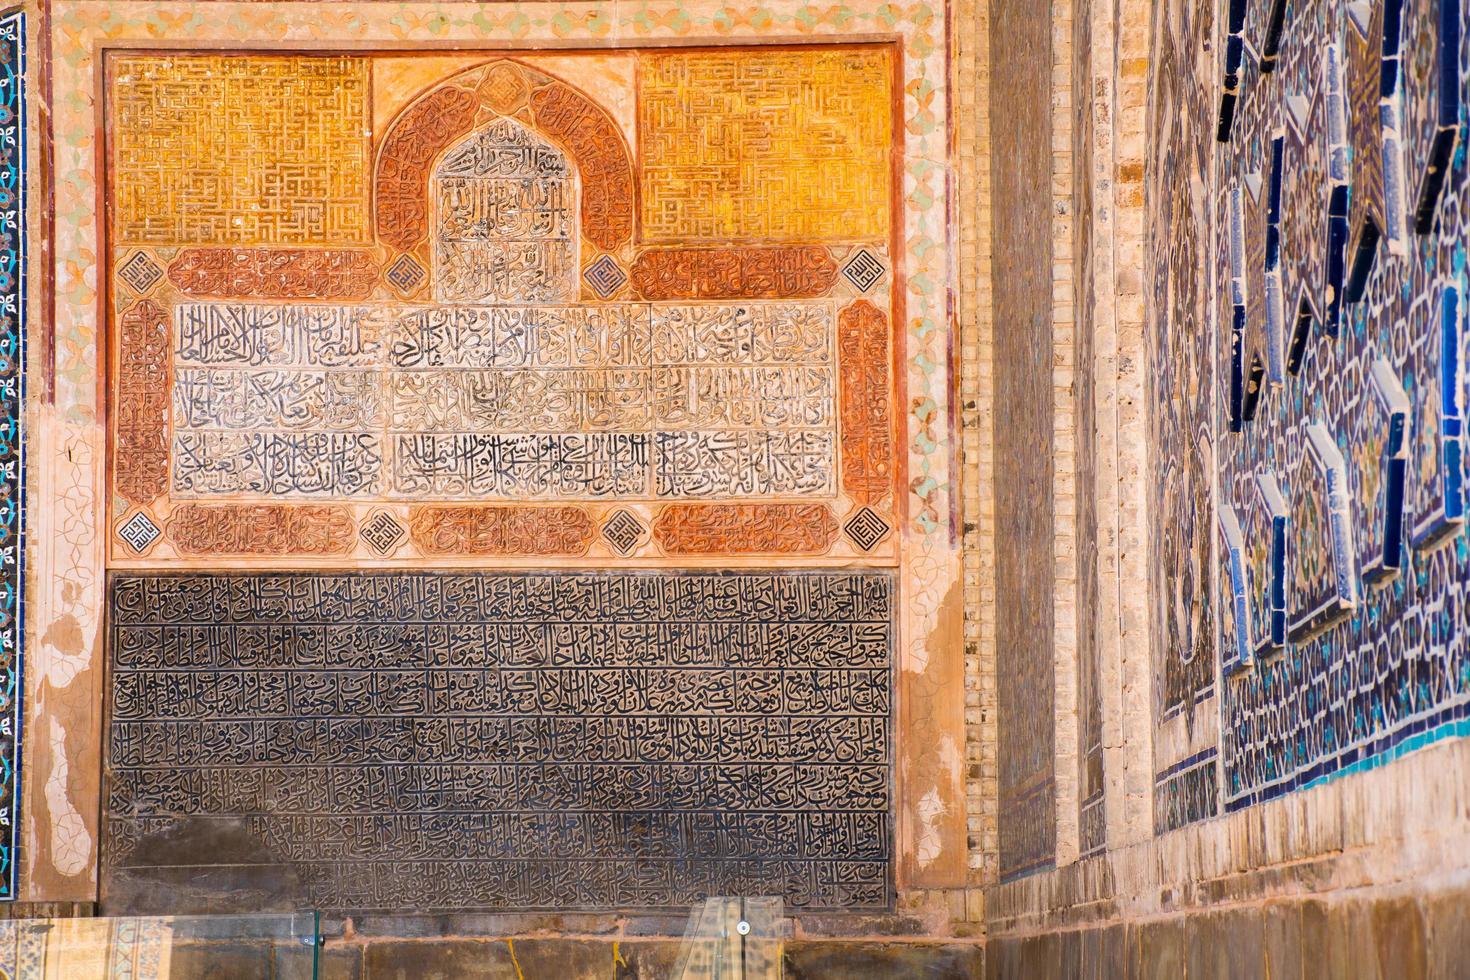 Artwork on walls in courtyard Friday Mosque Jame Mosque Of Isfahan photo